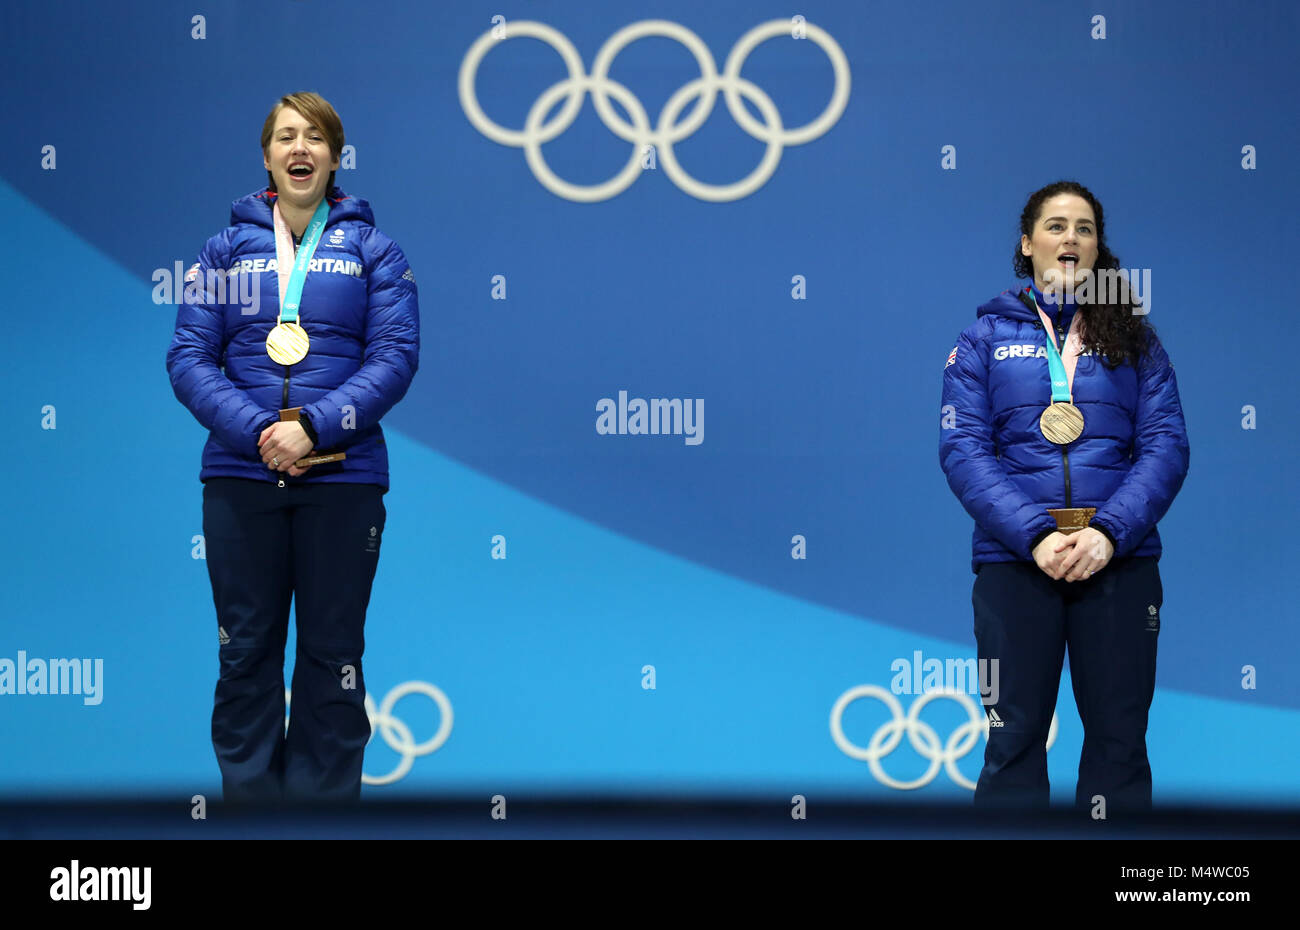 Great Britain's Lizzy Yarnold (left) poses with her gold medal alongside Laura Deas with her bronze medal during the medal ceremony for the Women's Skeleton on day nine of the PyeongChang 2018 Winter Olympic Games in South Korea. Stock Photo